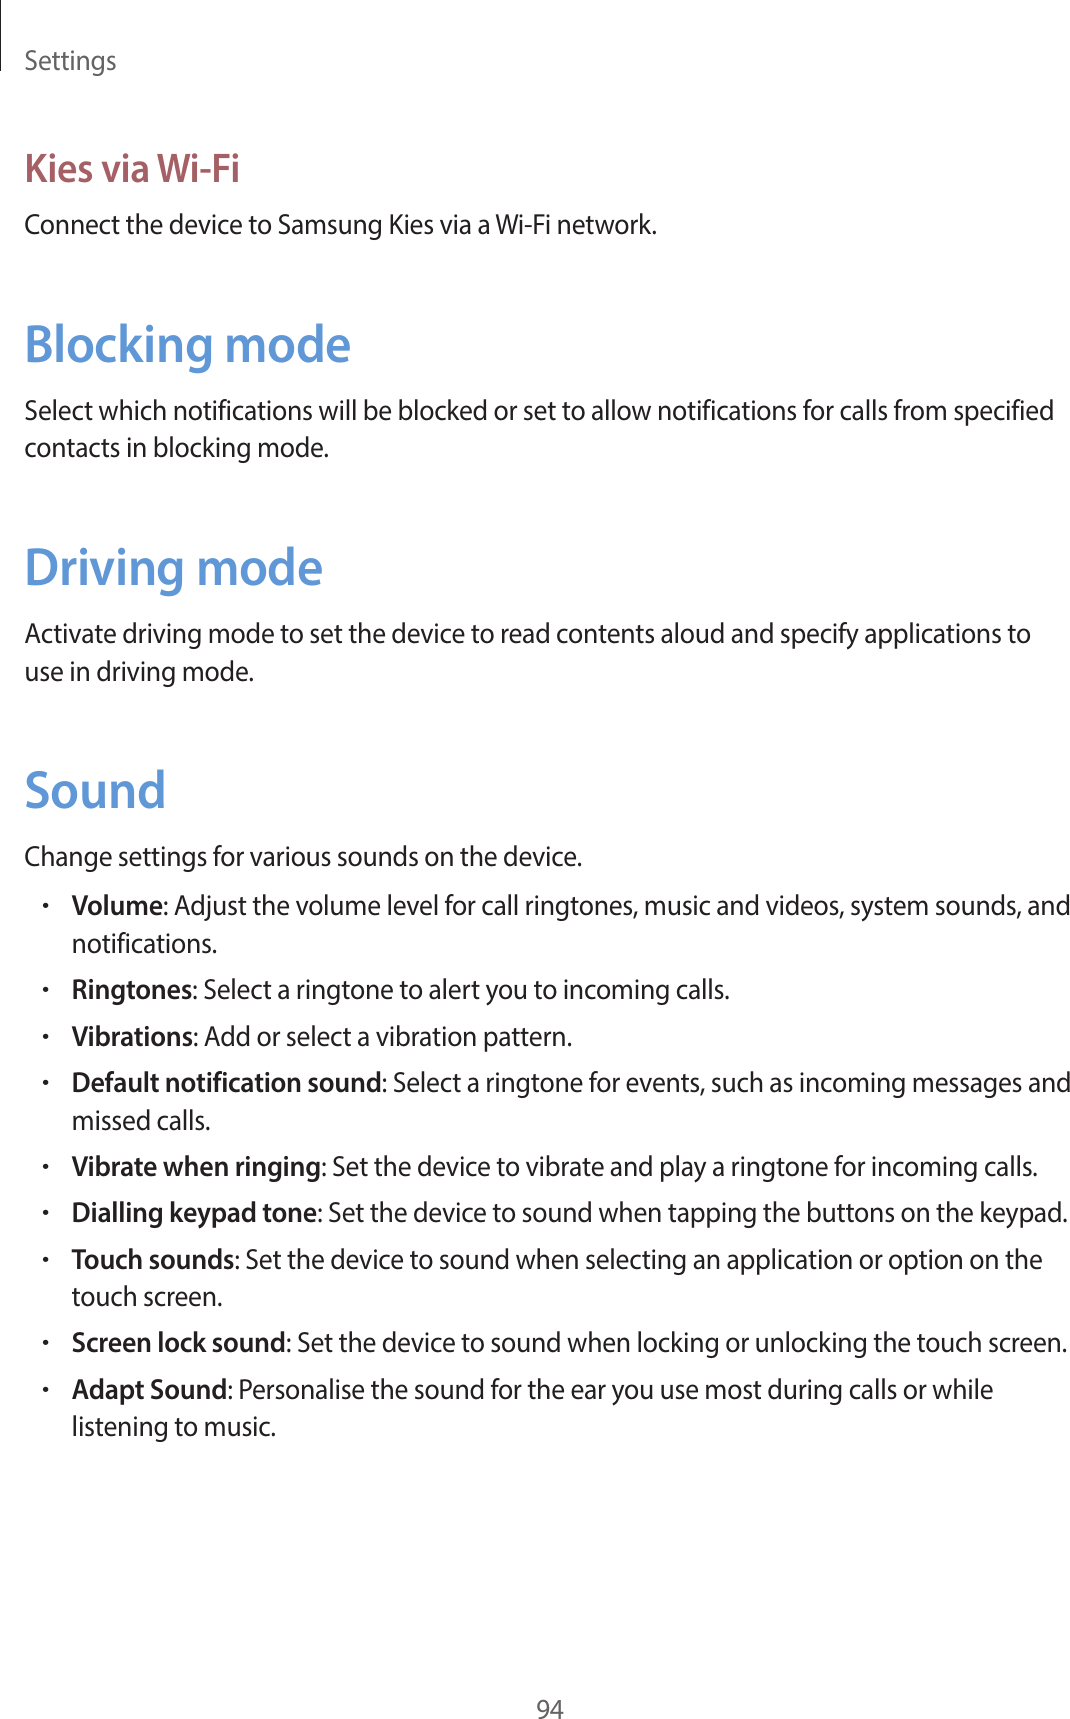 Settings94Kies via Wi-FiConnect the device to Samsung Kies via a Wi-Fi network.Blocking modeSelect which notifications will be blocked or set to allow notifications for calls from specified contacts in blocking mode.Driving modeActivate driving mode to set the device to read contents aloud and specify applications to use in driving mode.SoundChange settings for various sounds on the device.•Volume: Adjust the volume level for call ringtones, music and videos, system sounds, and notifications.•Ringtones: Select a ringtone to alert you to incoming calls.•Vibrations: Add or select a vibration pattern.•Default notification sound: Select a ringtone for events, such as incoming messages and missed calls.•Vibrate when ringing: Set the device to vibrate and play a ringtone for incoming calls.•Dialling keypad tone: Set the device to sound when tapping the buttons on the keypad.•Touch sounds: Set the device to sound when selecting an application or option on the touch screen.•Screen lock sound: Set the device to sound when locking or unlocking the touch screen.•Adapt Sound: Personalise the sound for the ear you use most during calls or while listening to music.